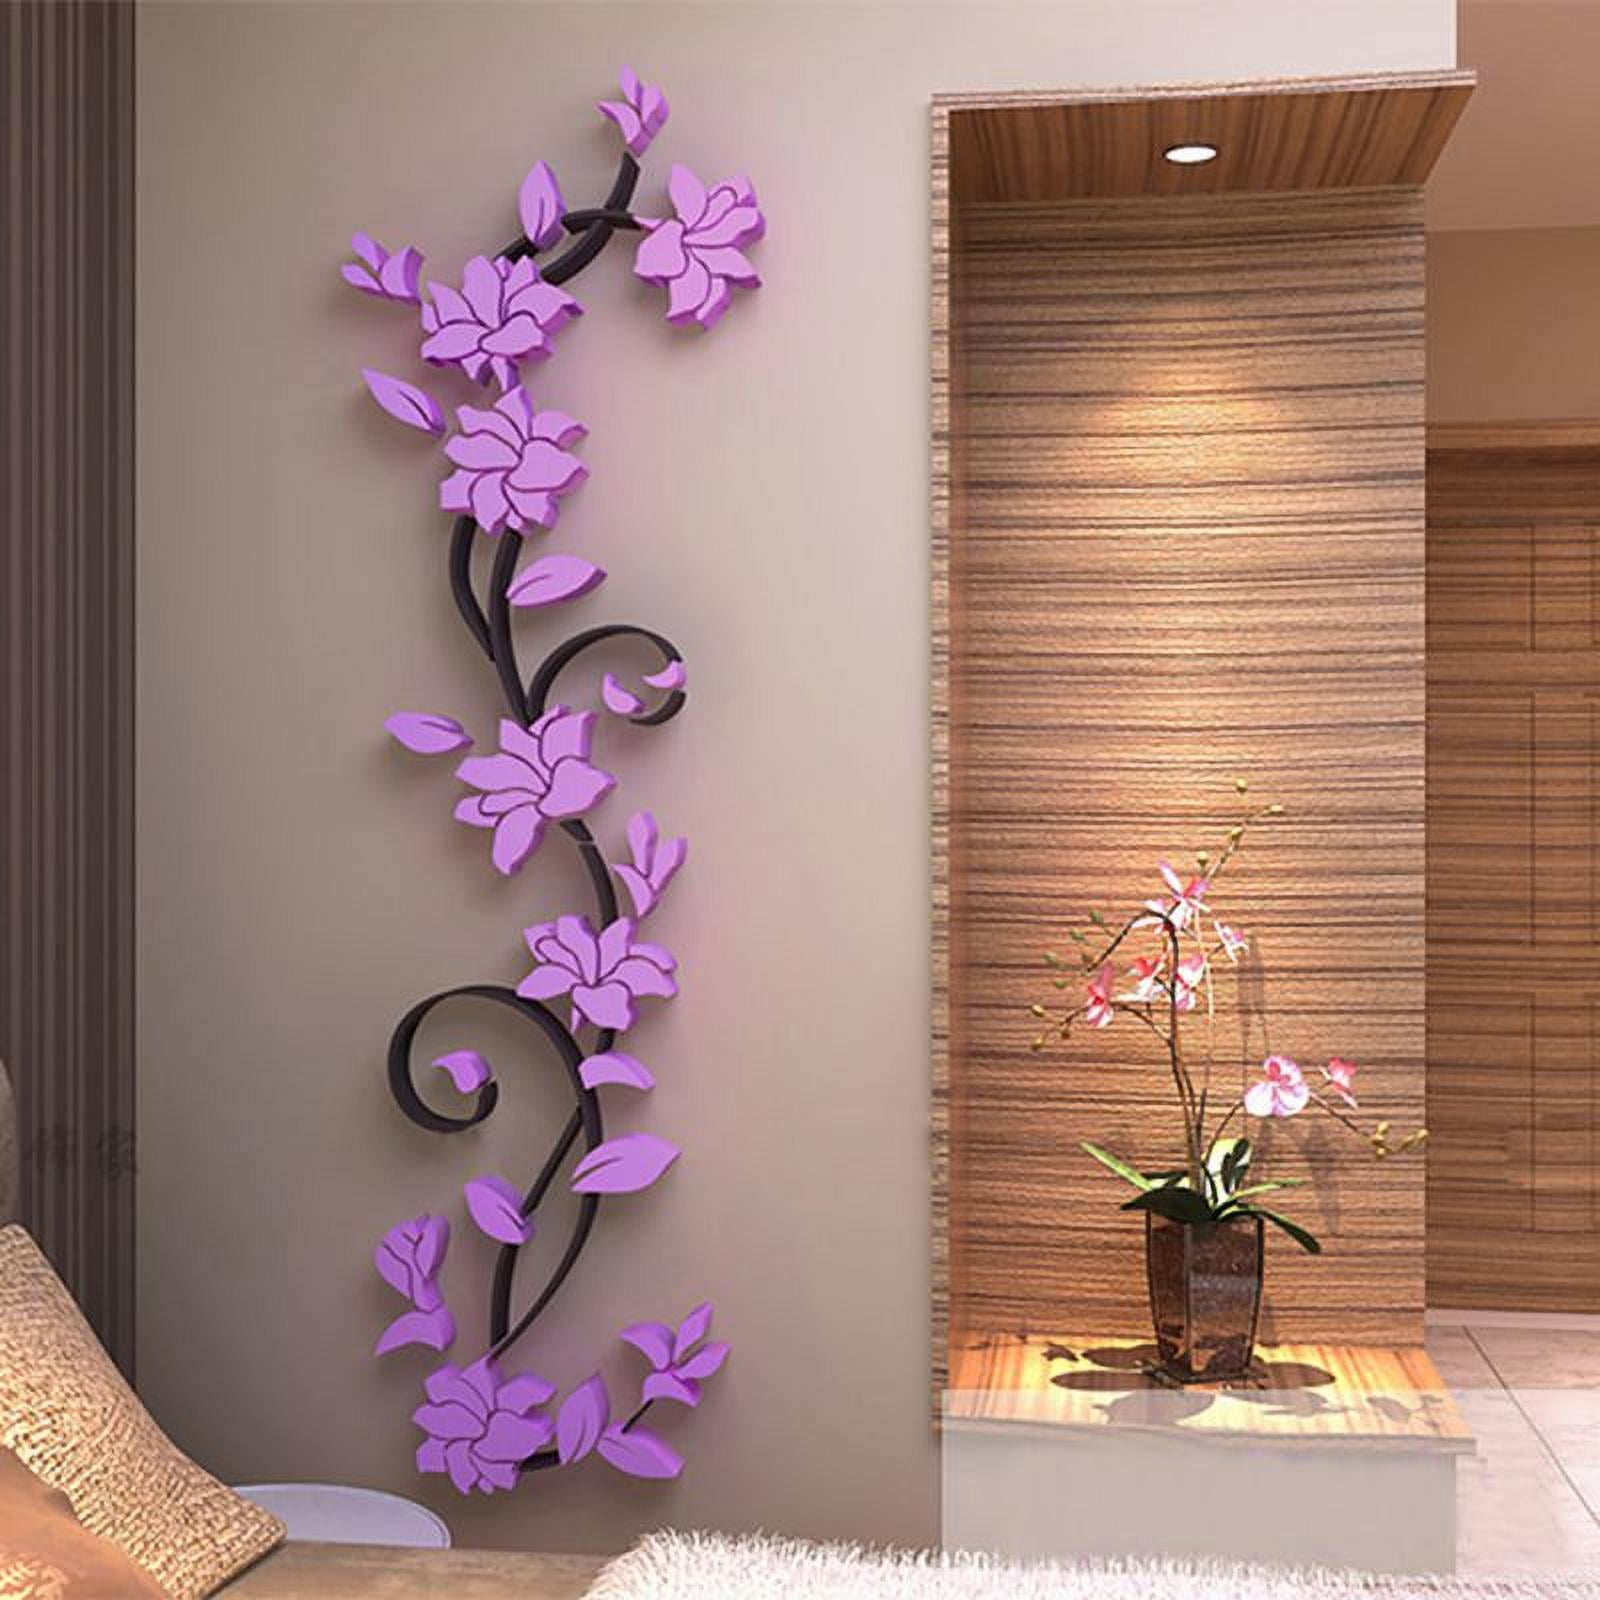 3D Mirror Floral Wall Sticker Room Decal Mural Art DIY Home Decor Removable LD 